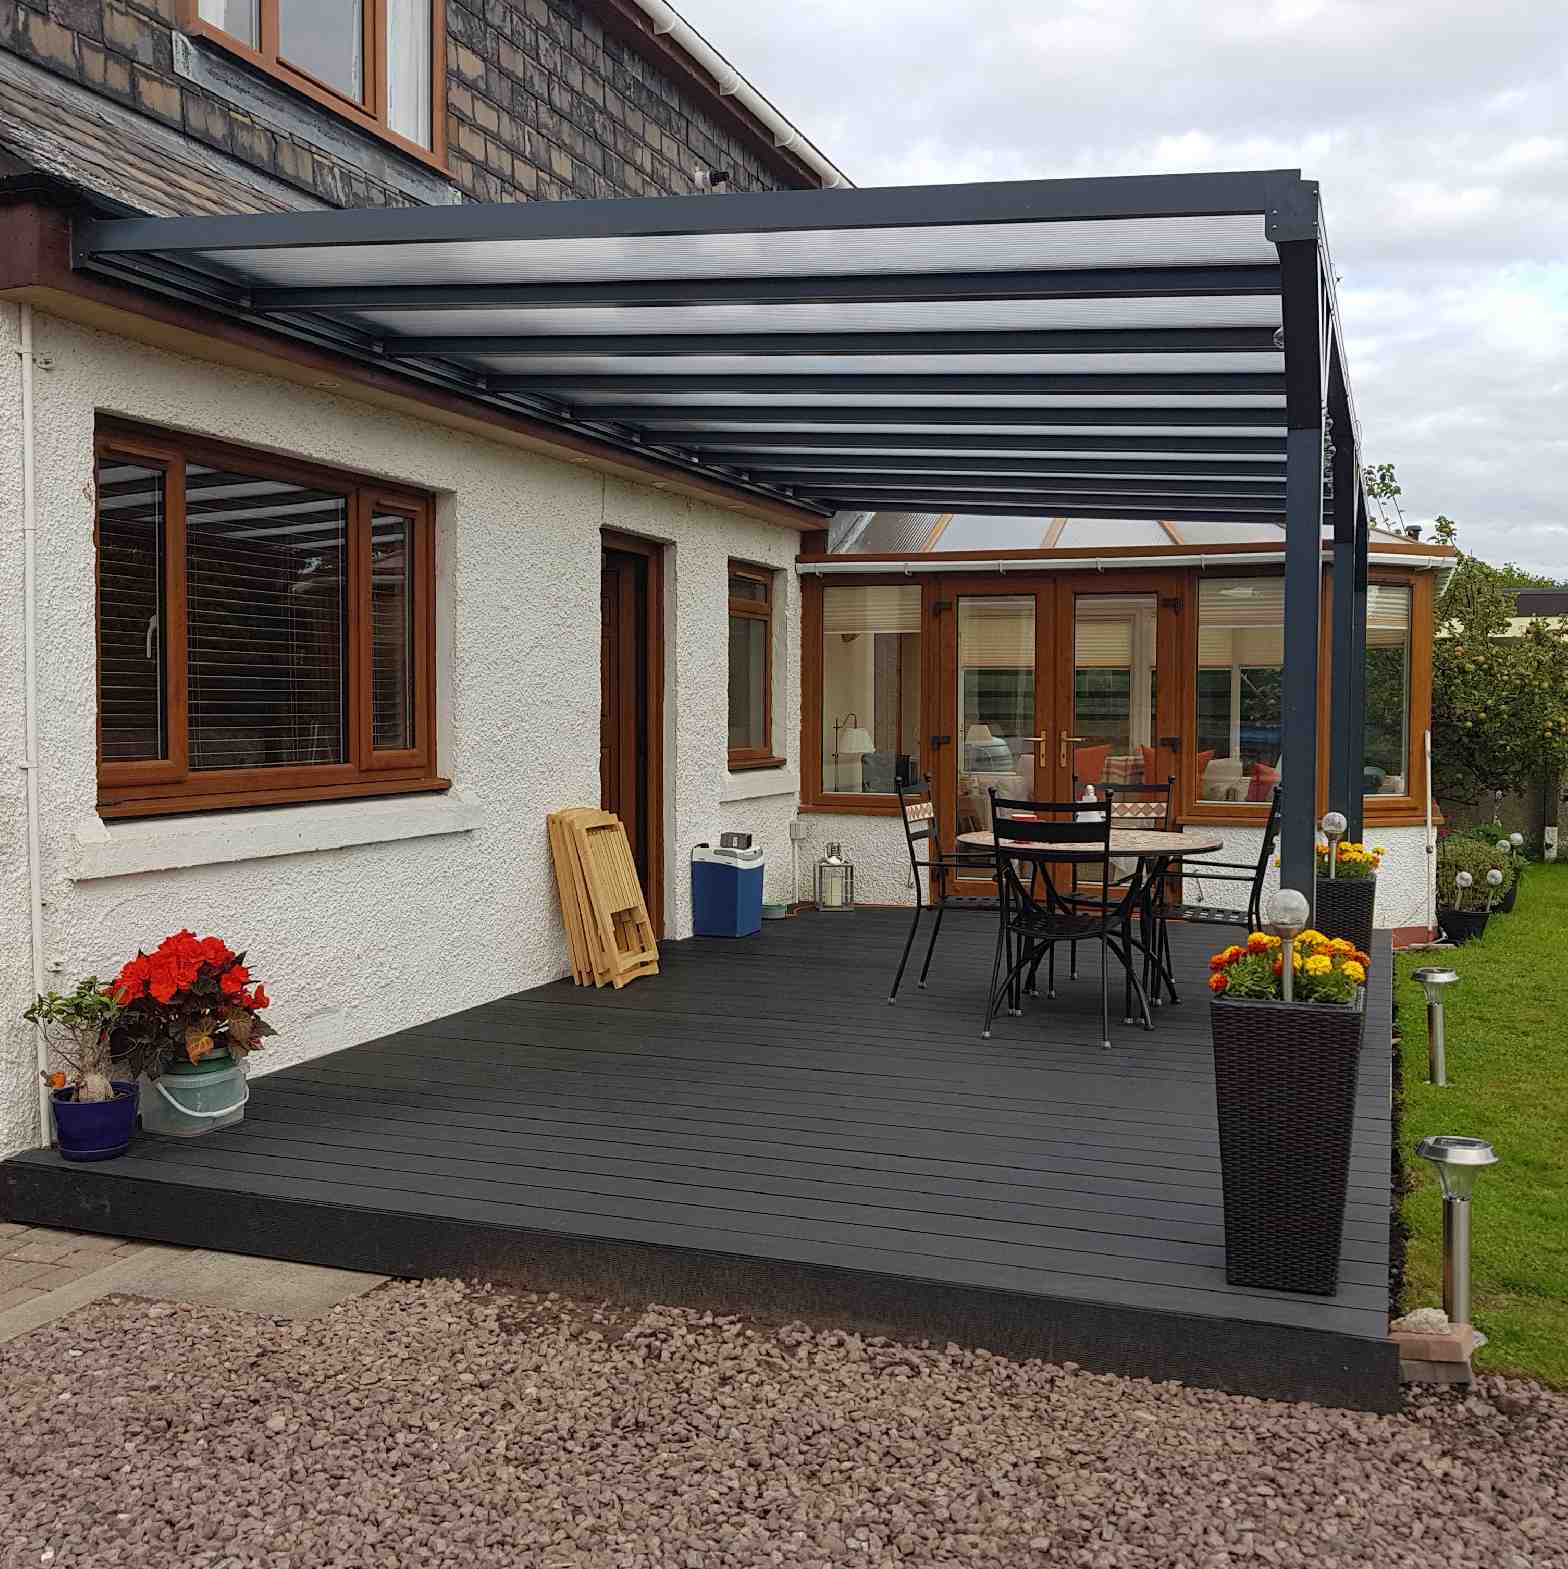 Buy Omega Verandah, Anthracite Grey, 16mm Polycarbonate Glazing - 8.4m (W) x 2.5m (P), (4) Supporting Posts online today